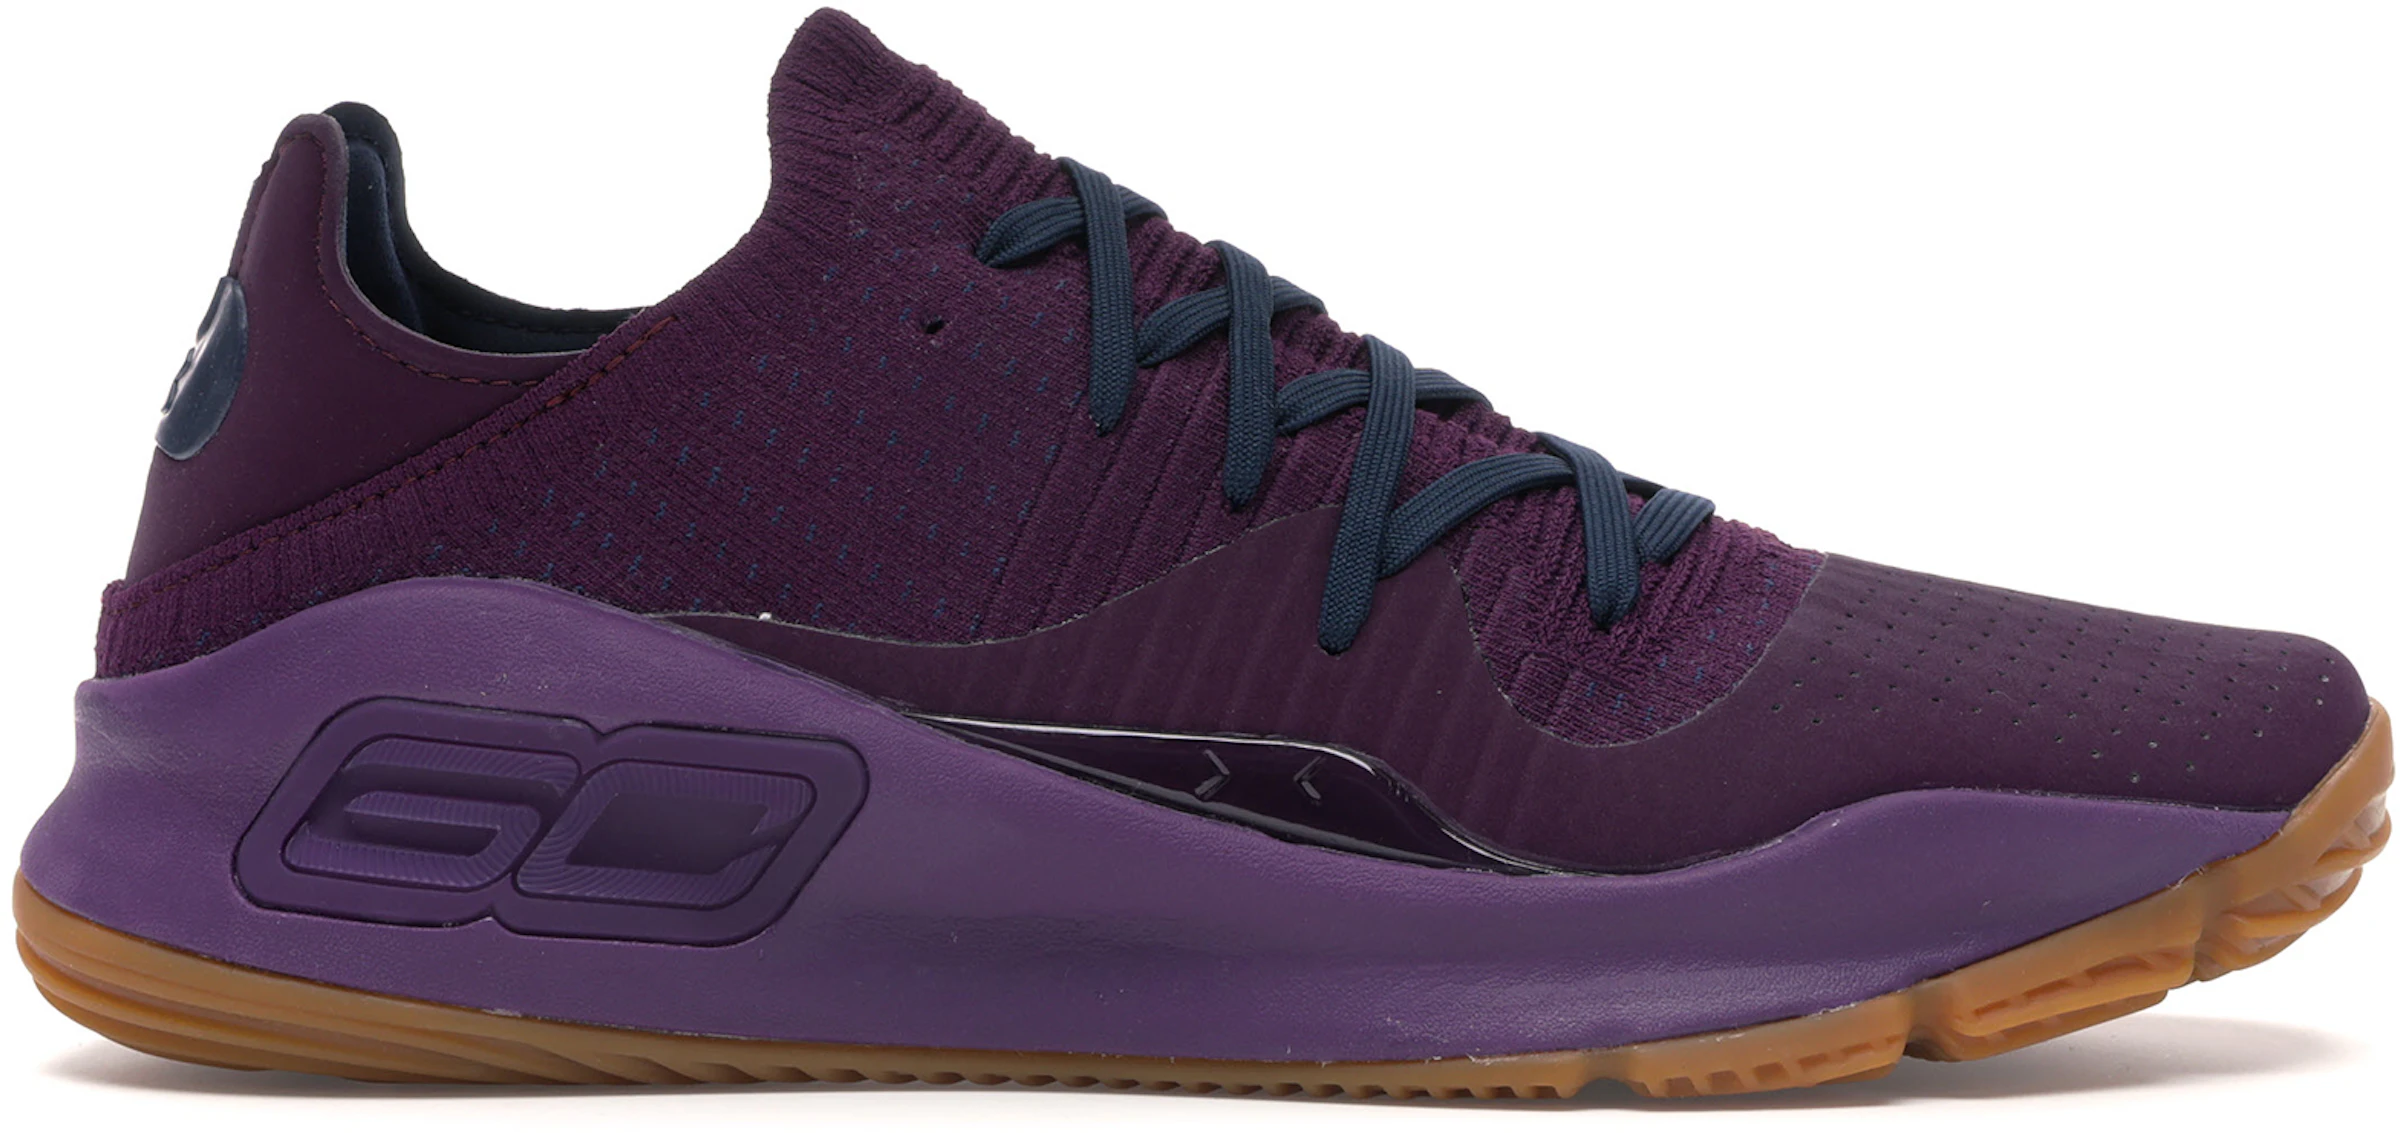 Under Armour Curry 4 Low Merlot - 3000083-500 -